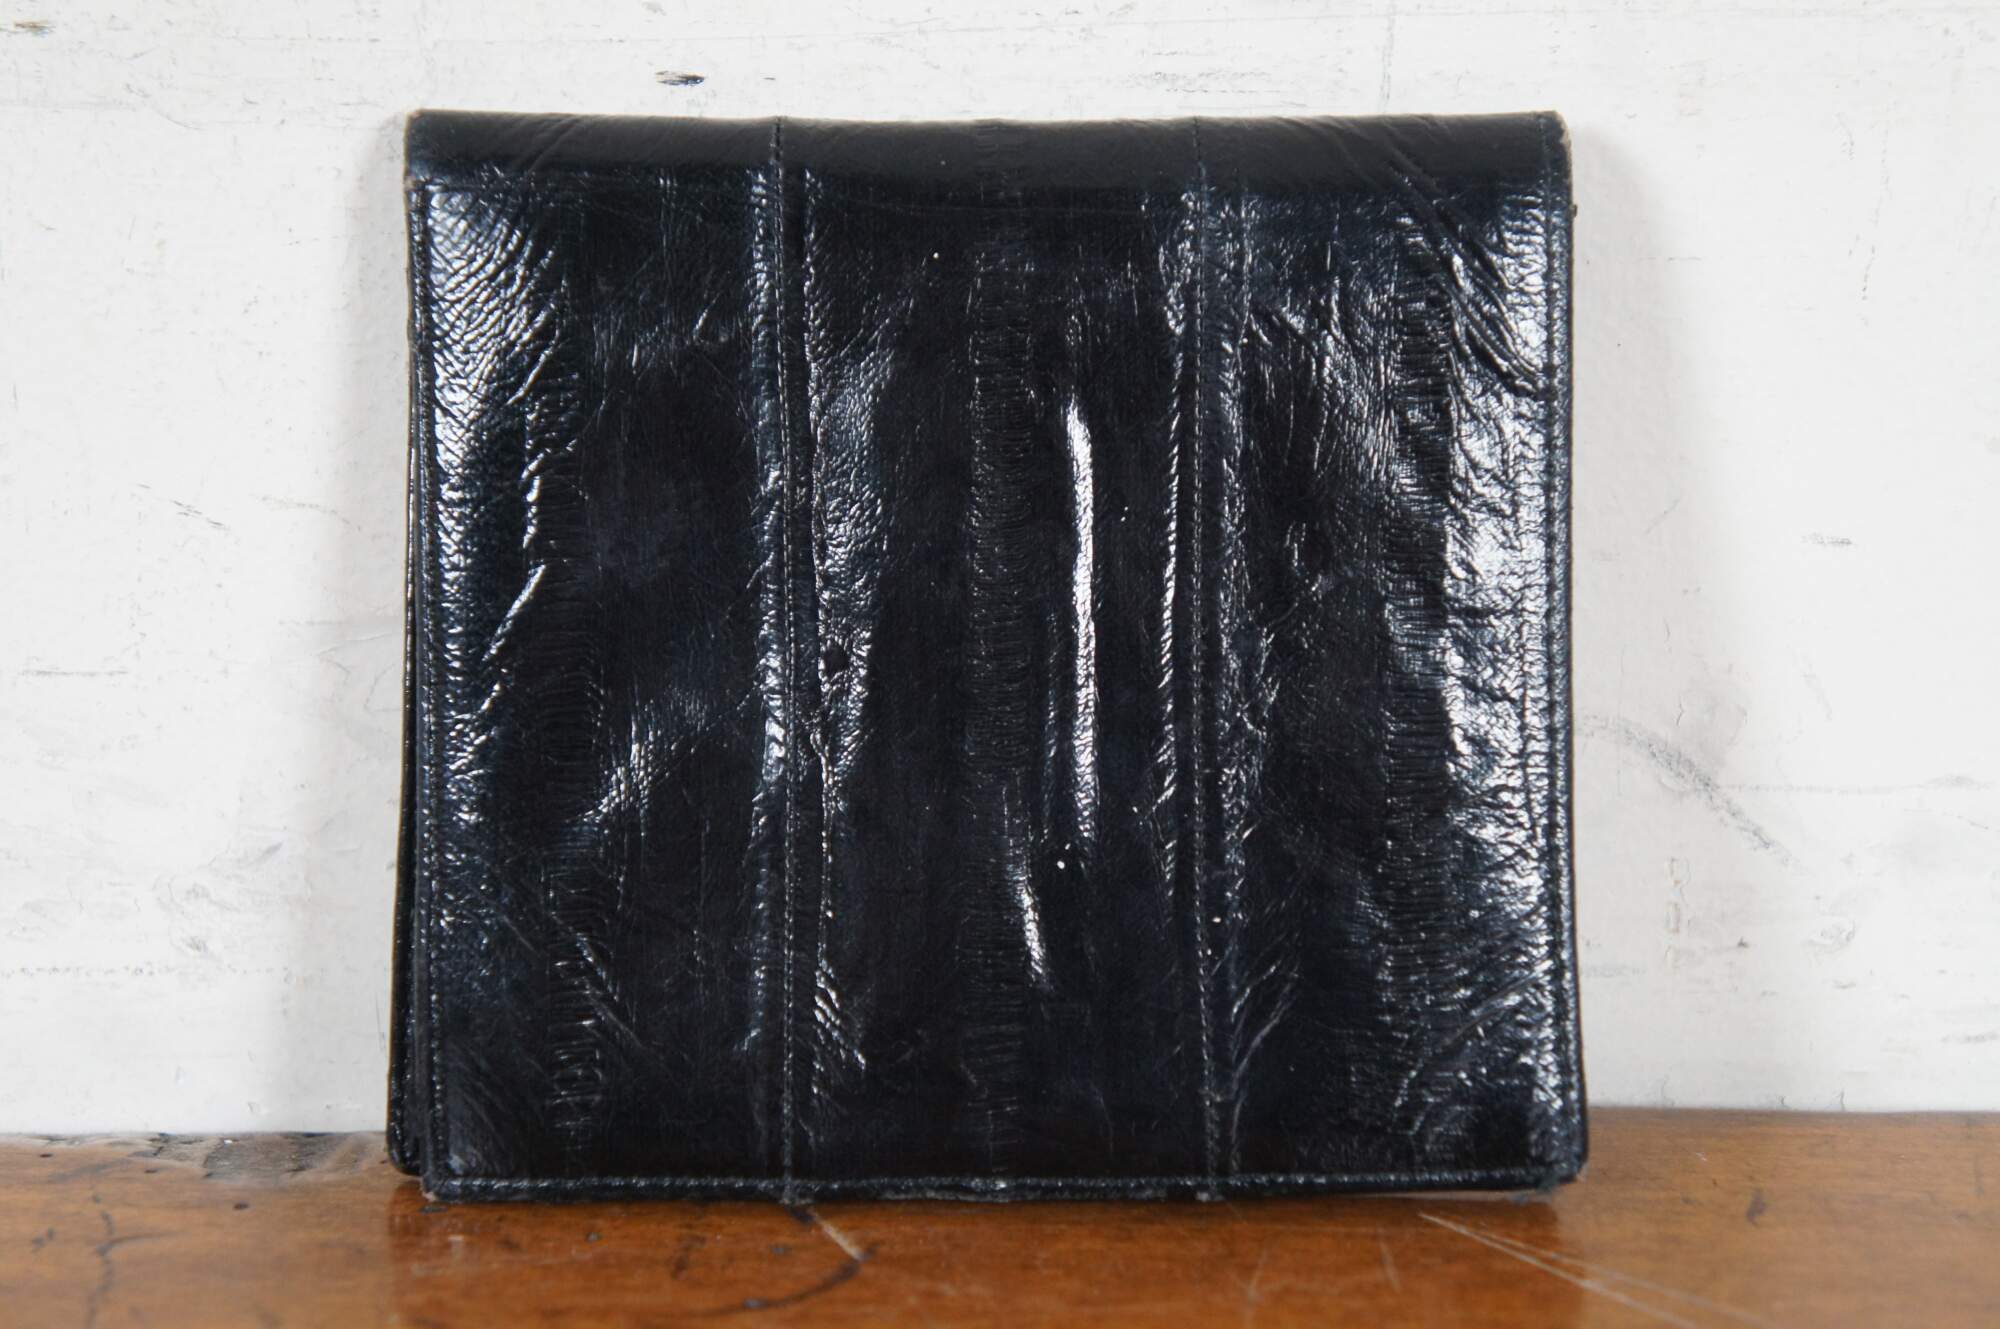 Vintage Judith Leiber Italian Patent Leather Bag Mirror Comb Coin Purse